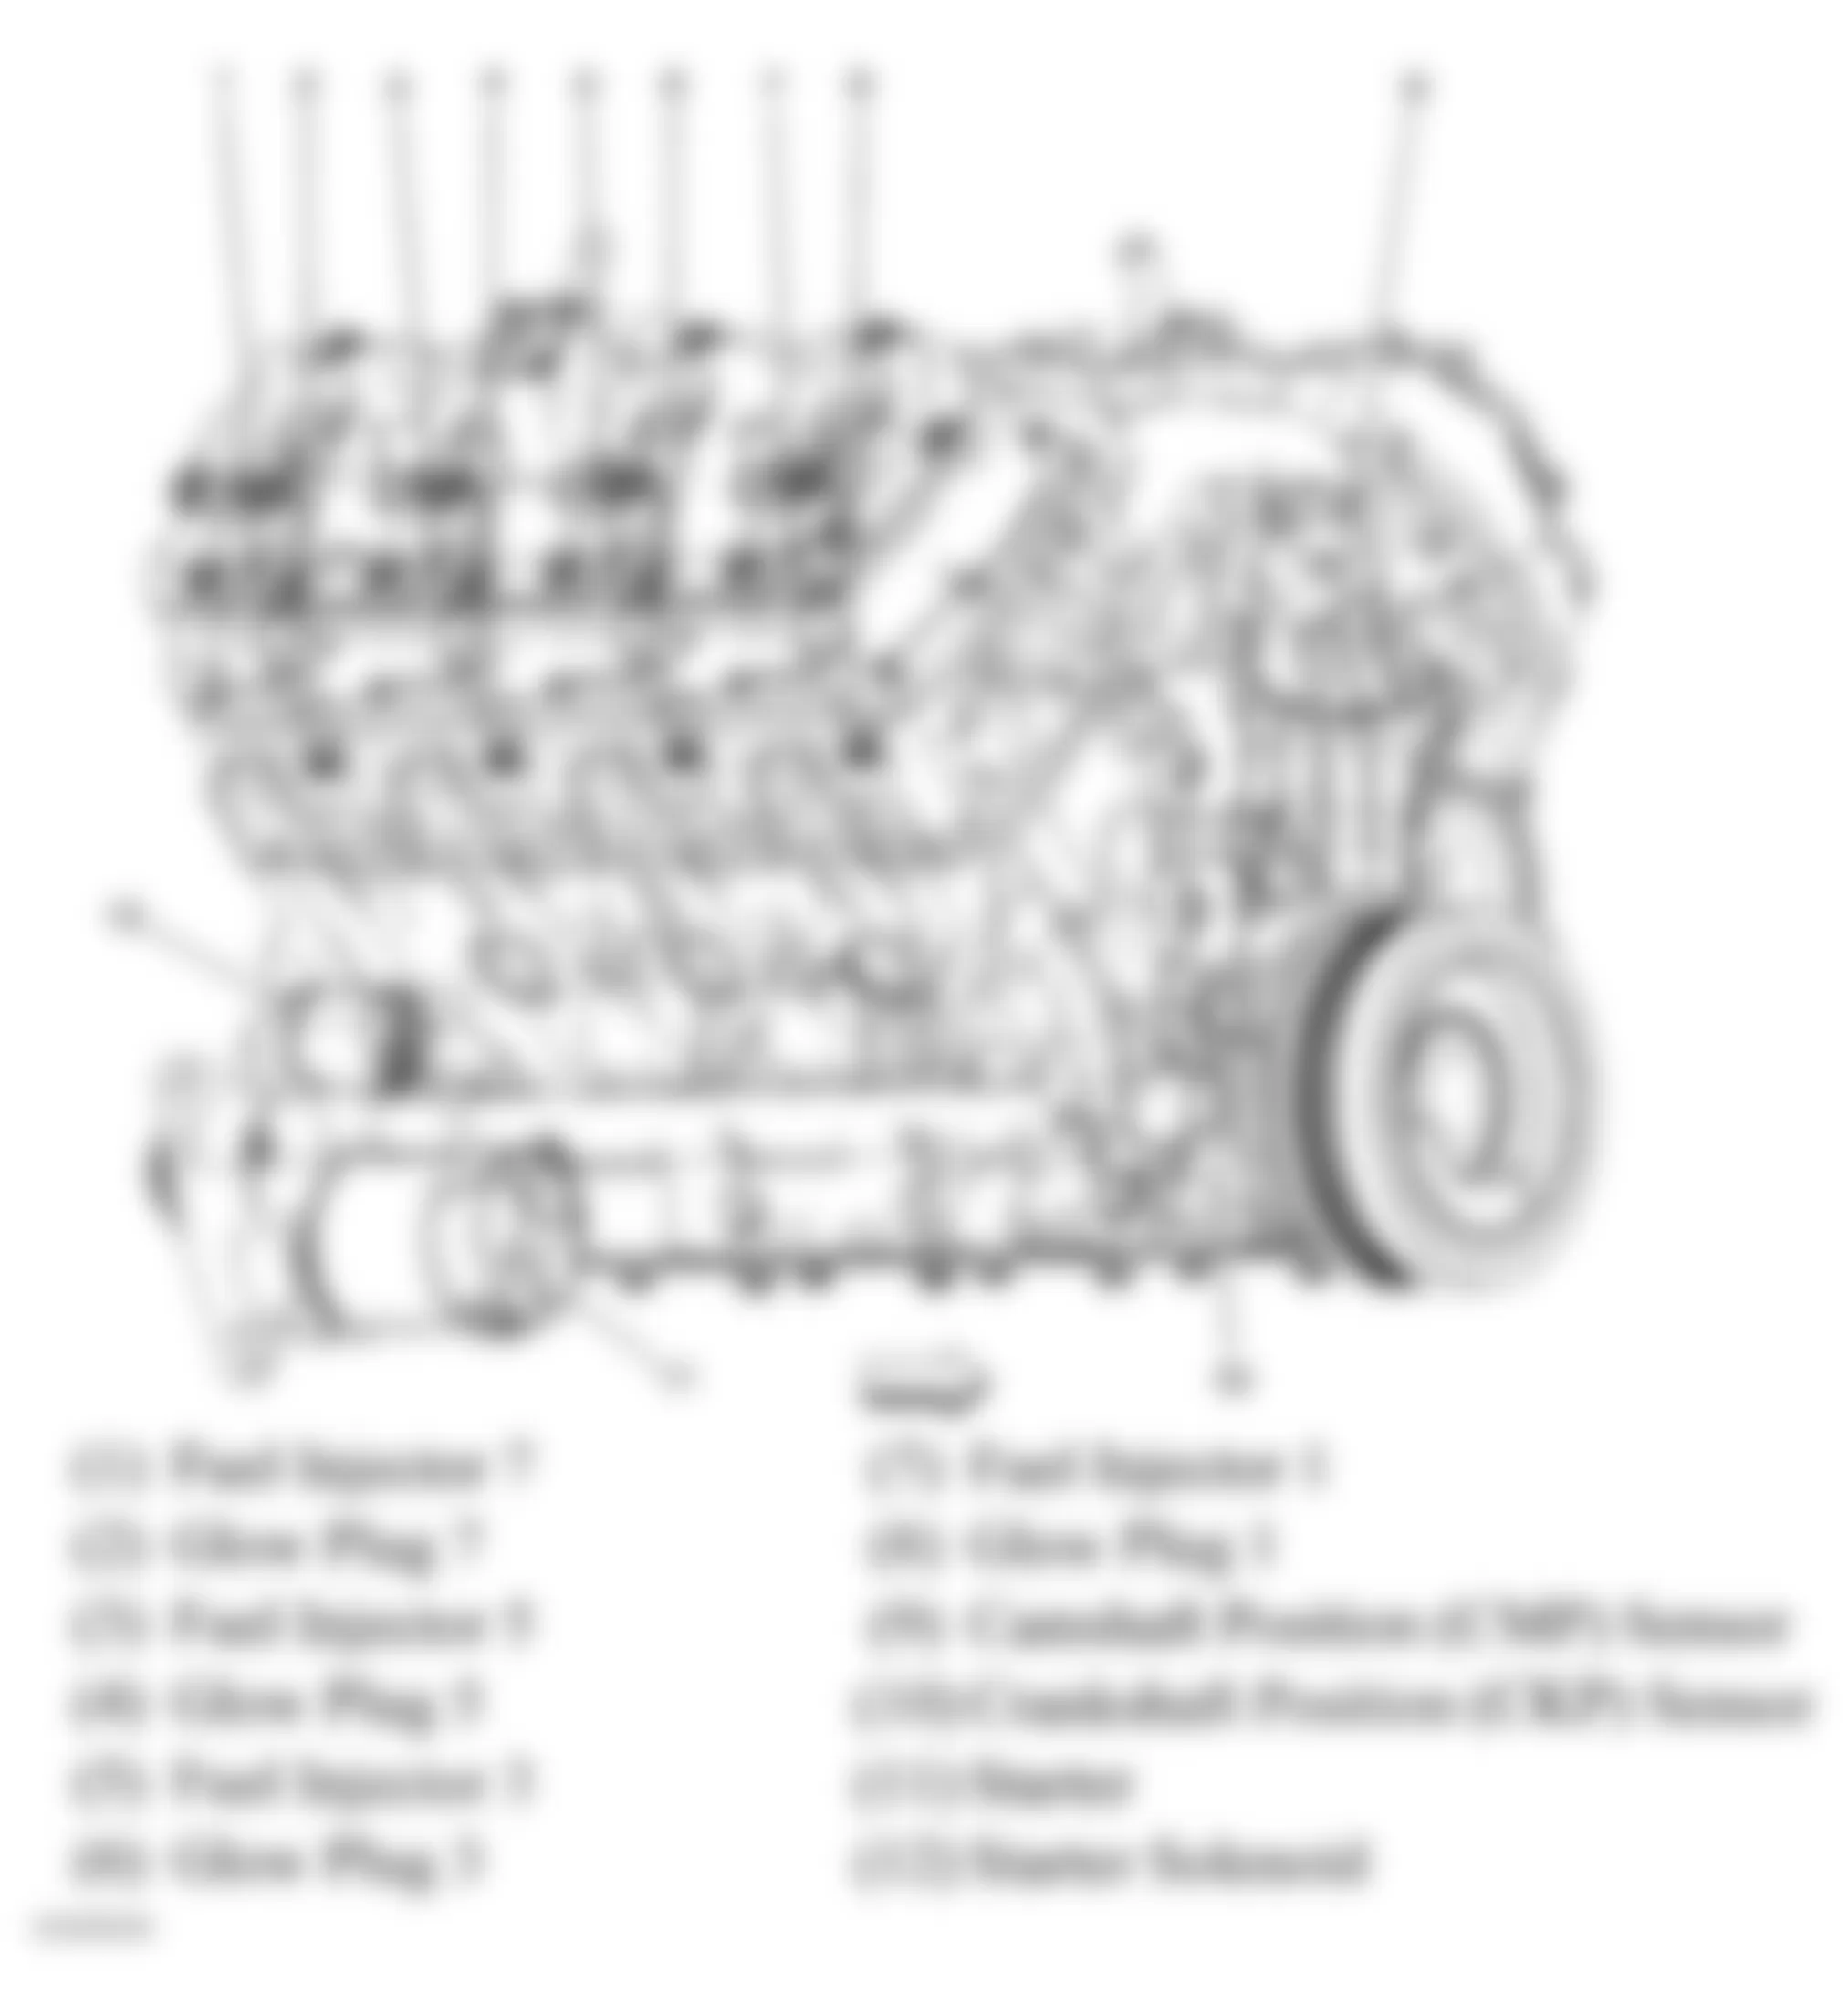 GMC Savana G3500 2008 - Component Locations -  Right Side Of Engine (6.6L)